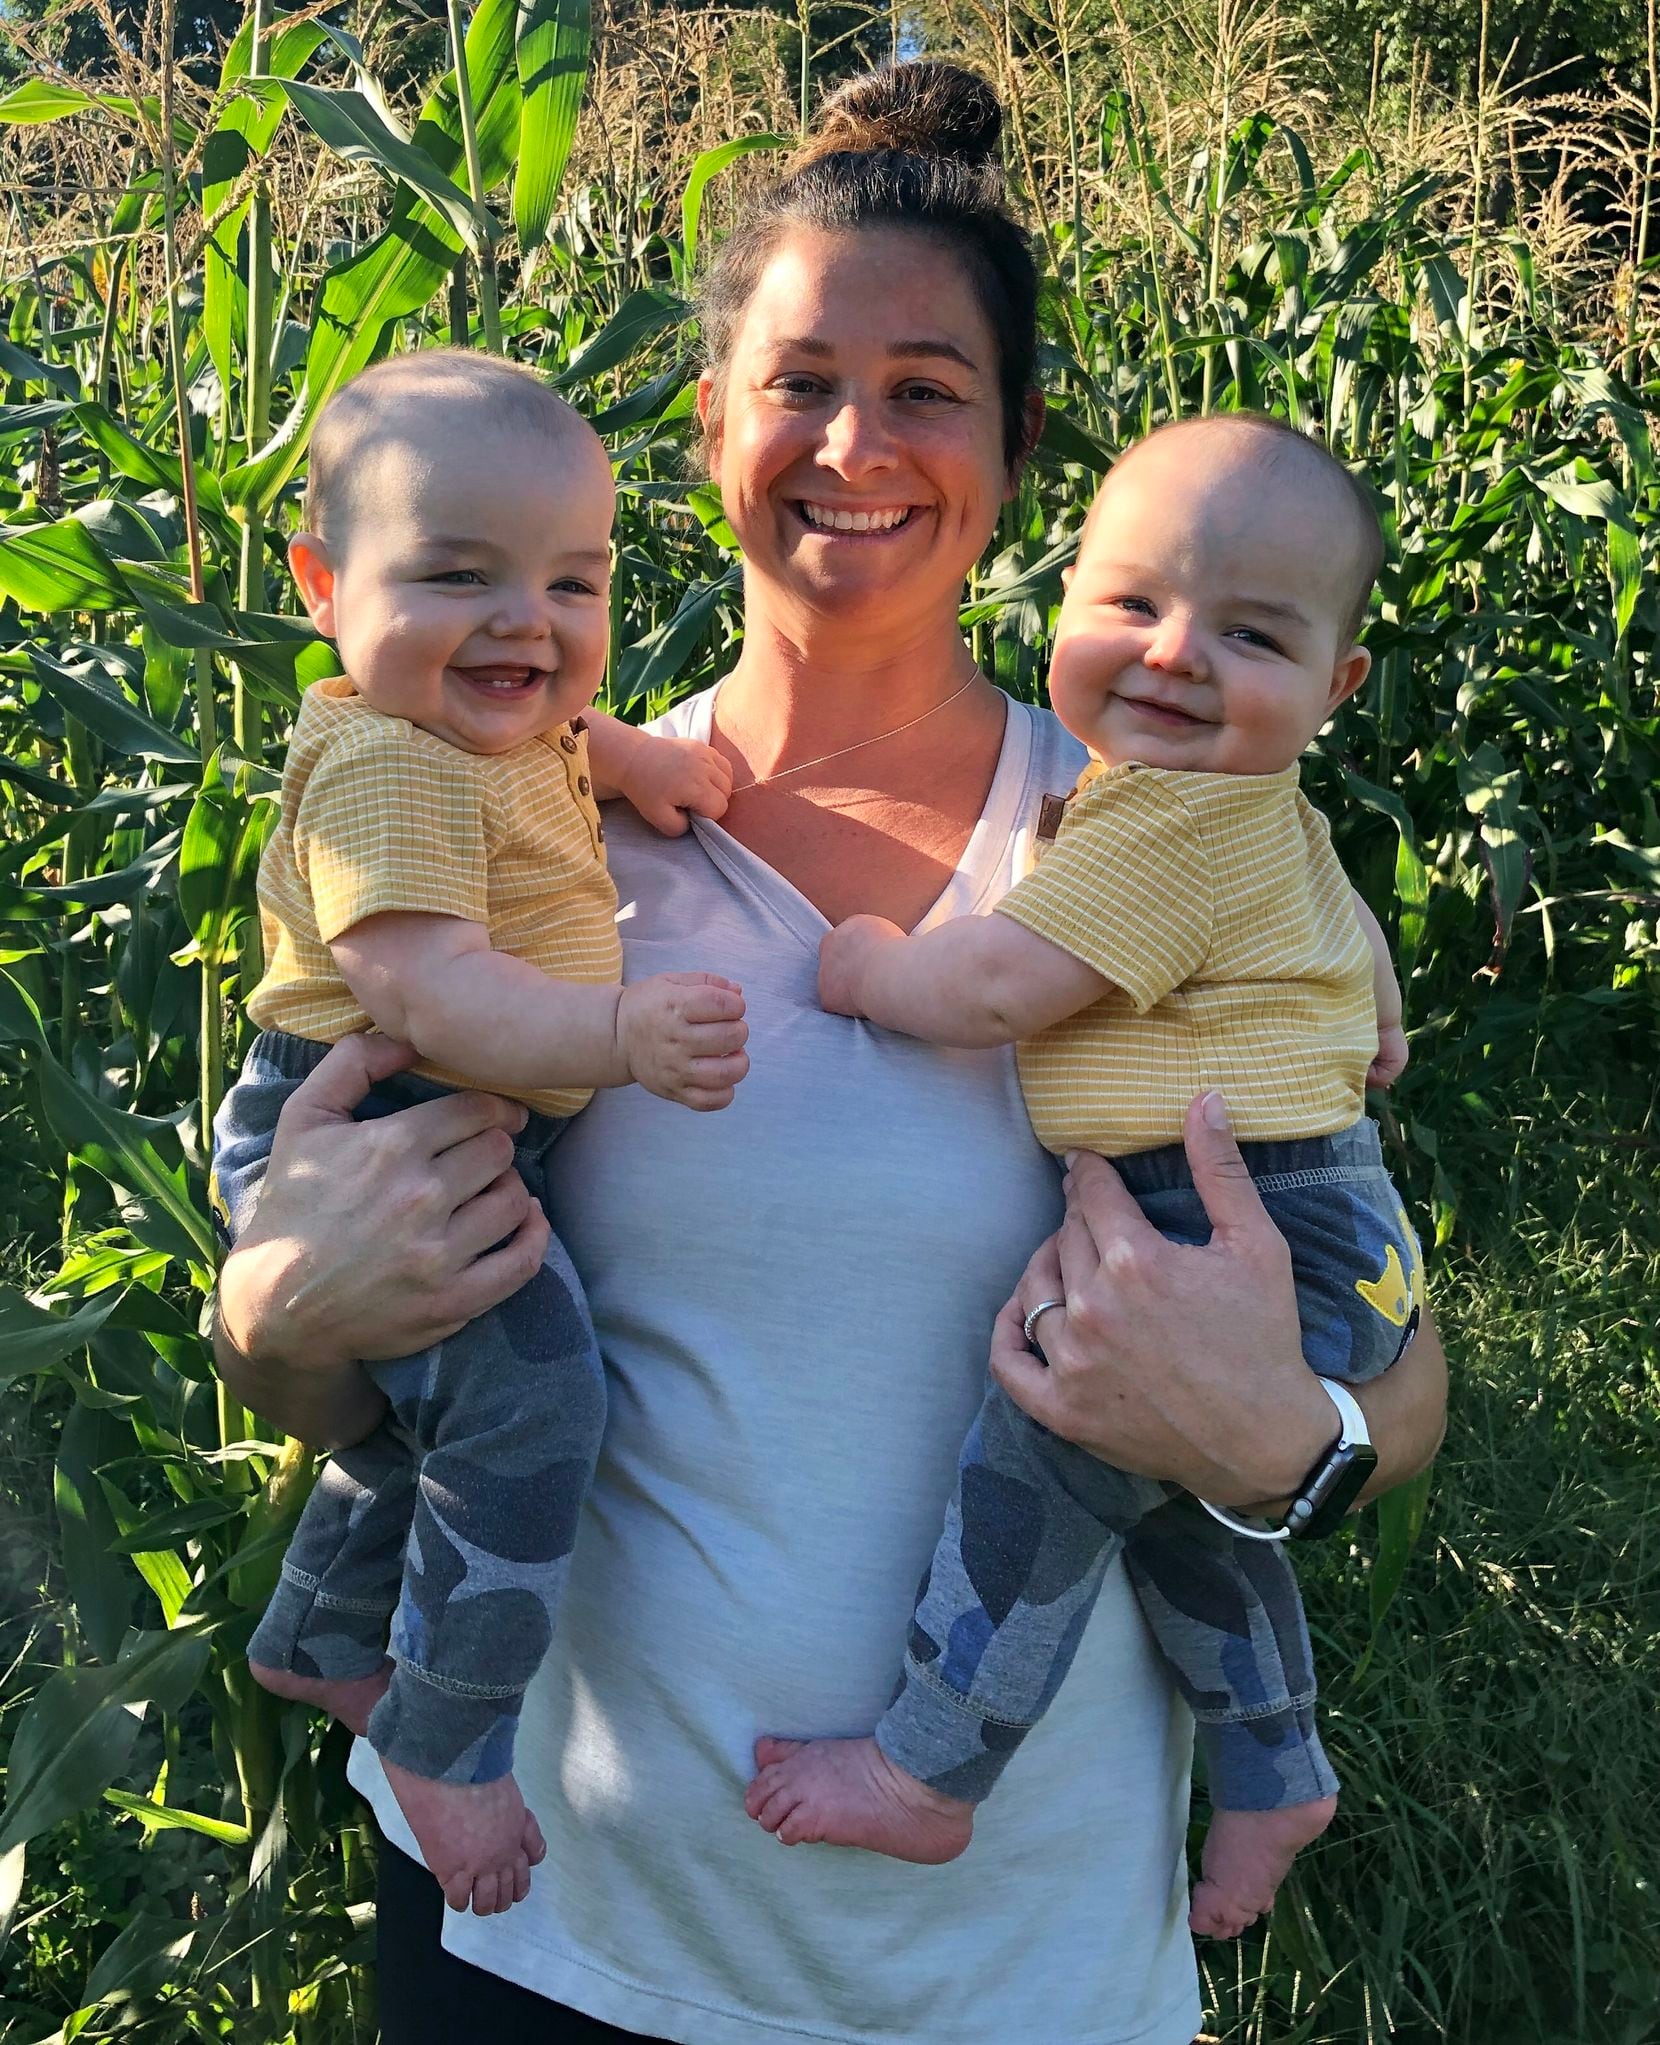 Tiffany Stevens, of Weatherford, holds her twins, Nico and Knox Stevens, who were born in December 2020. Stevens is donating breast milk to the Mothers' Milk Bank of North Texas, which provided milk to Nico, right, after he was born.